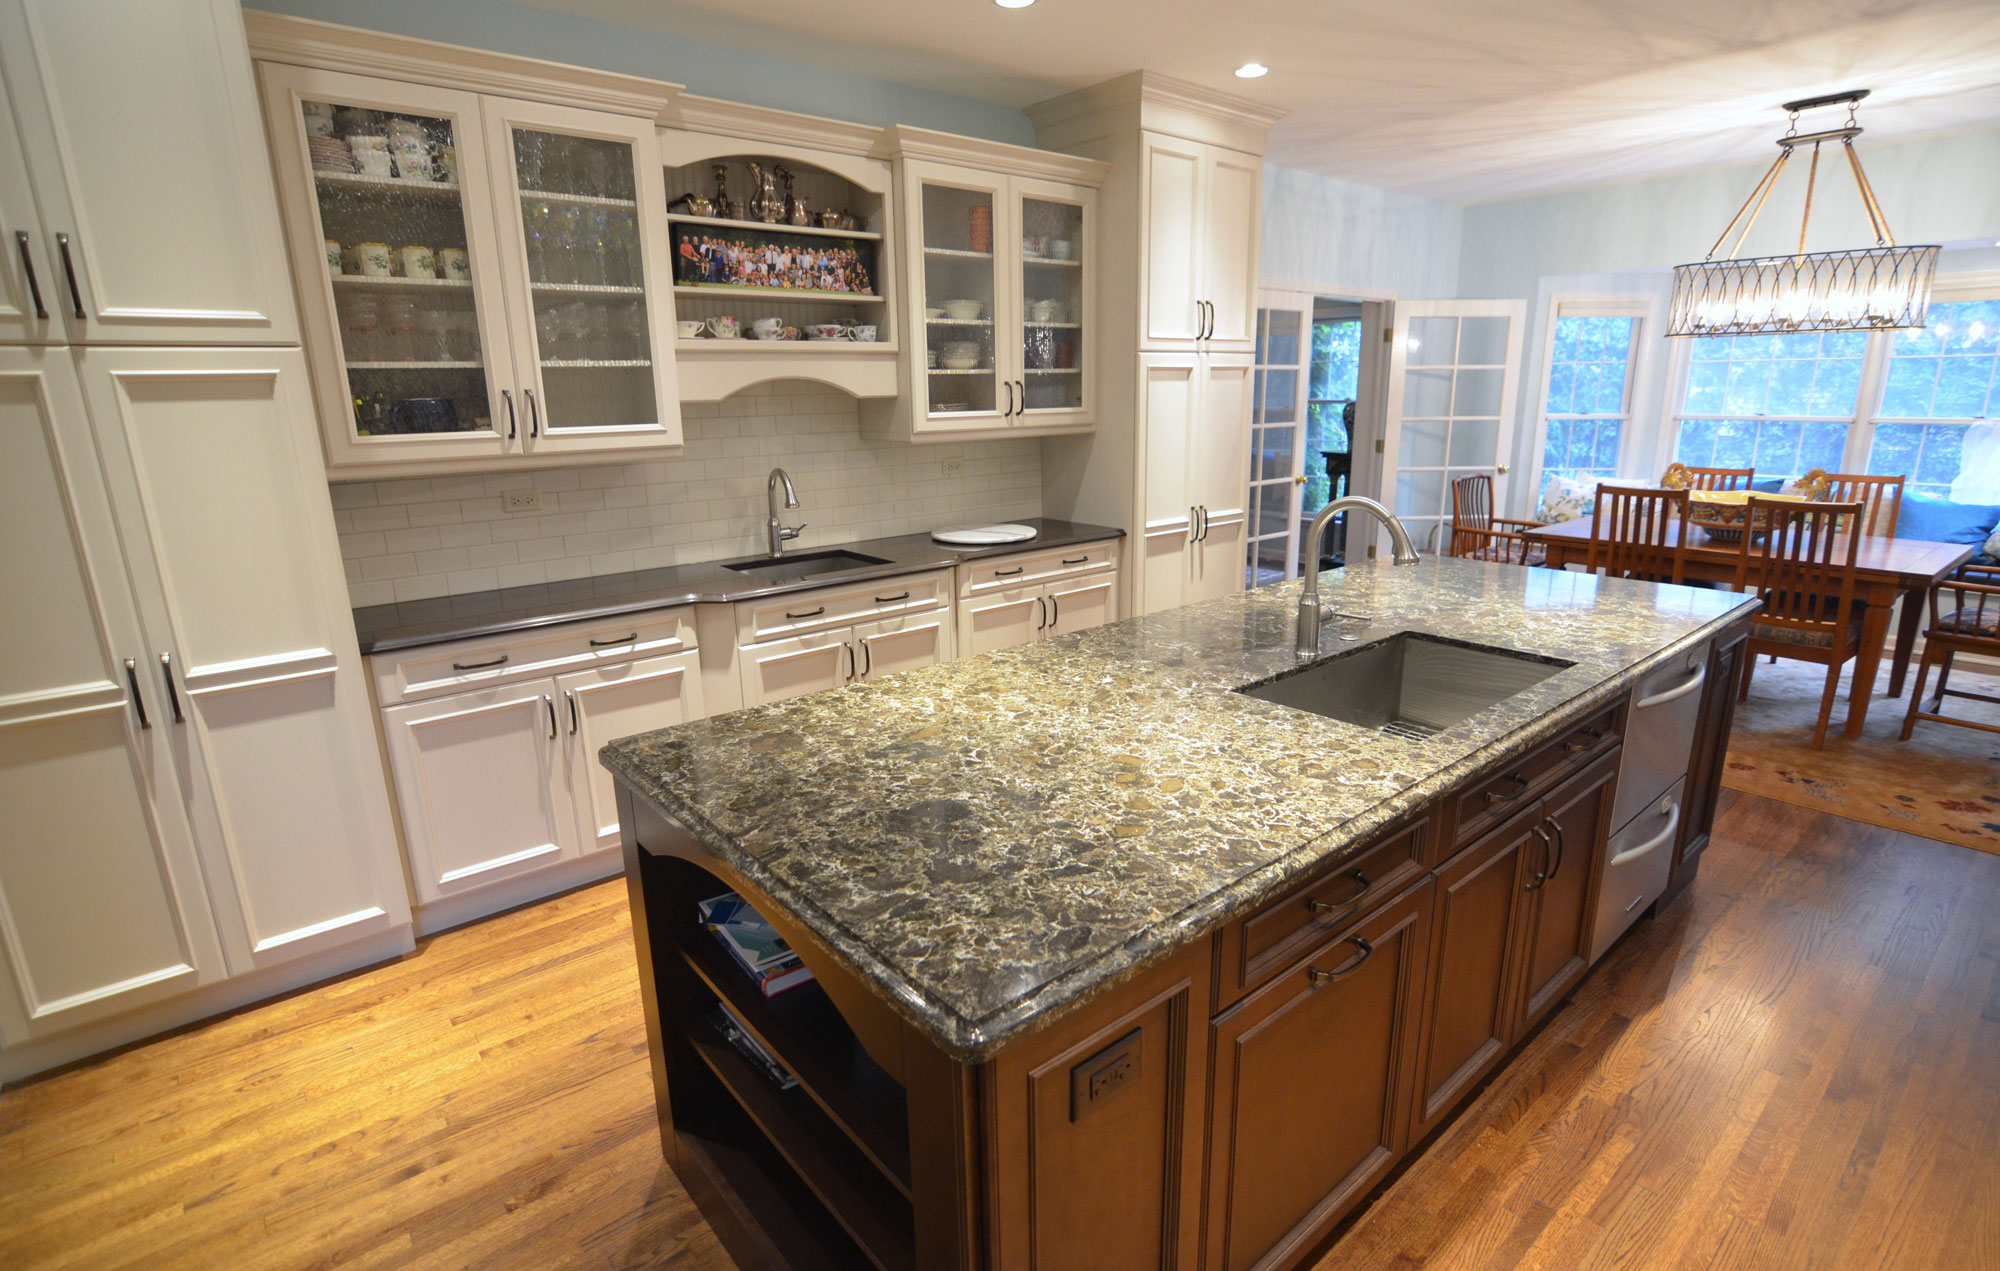 Kitchen remodeling in Naperville, IL. Oversized kitchen island with shelf space.